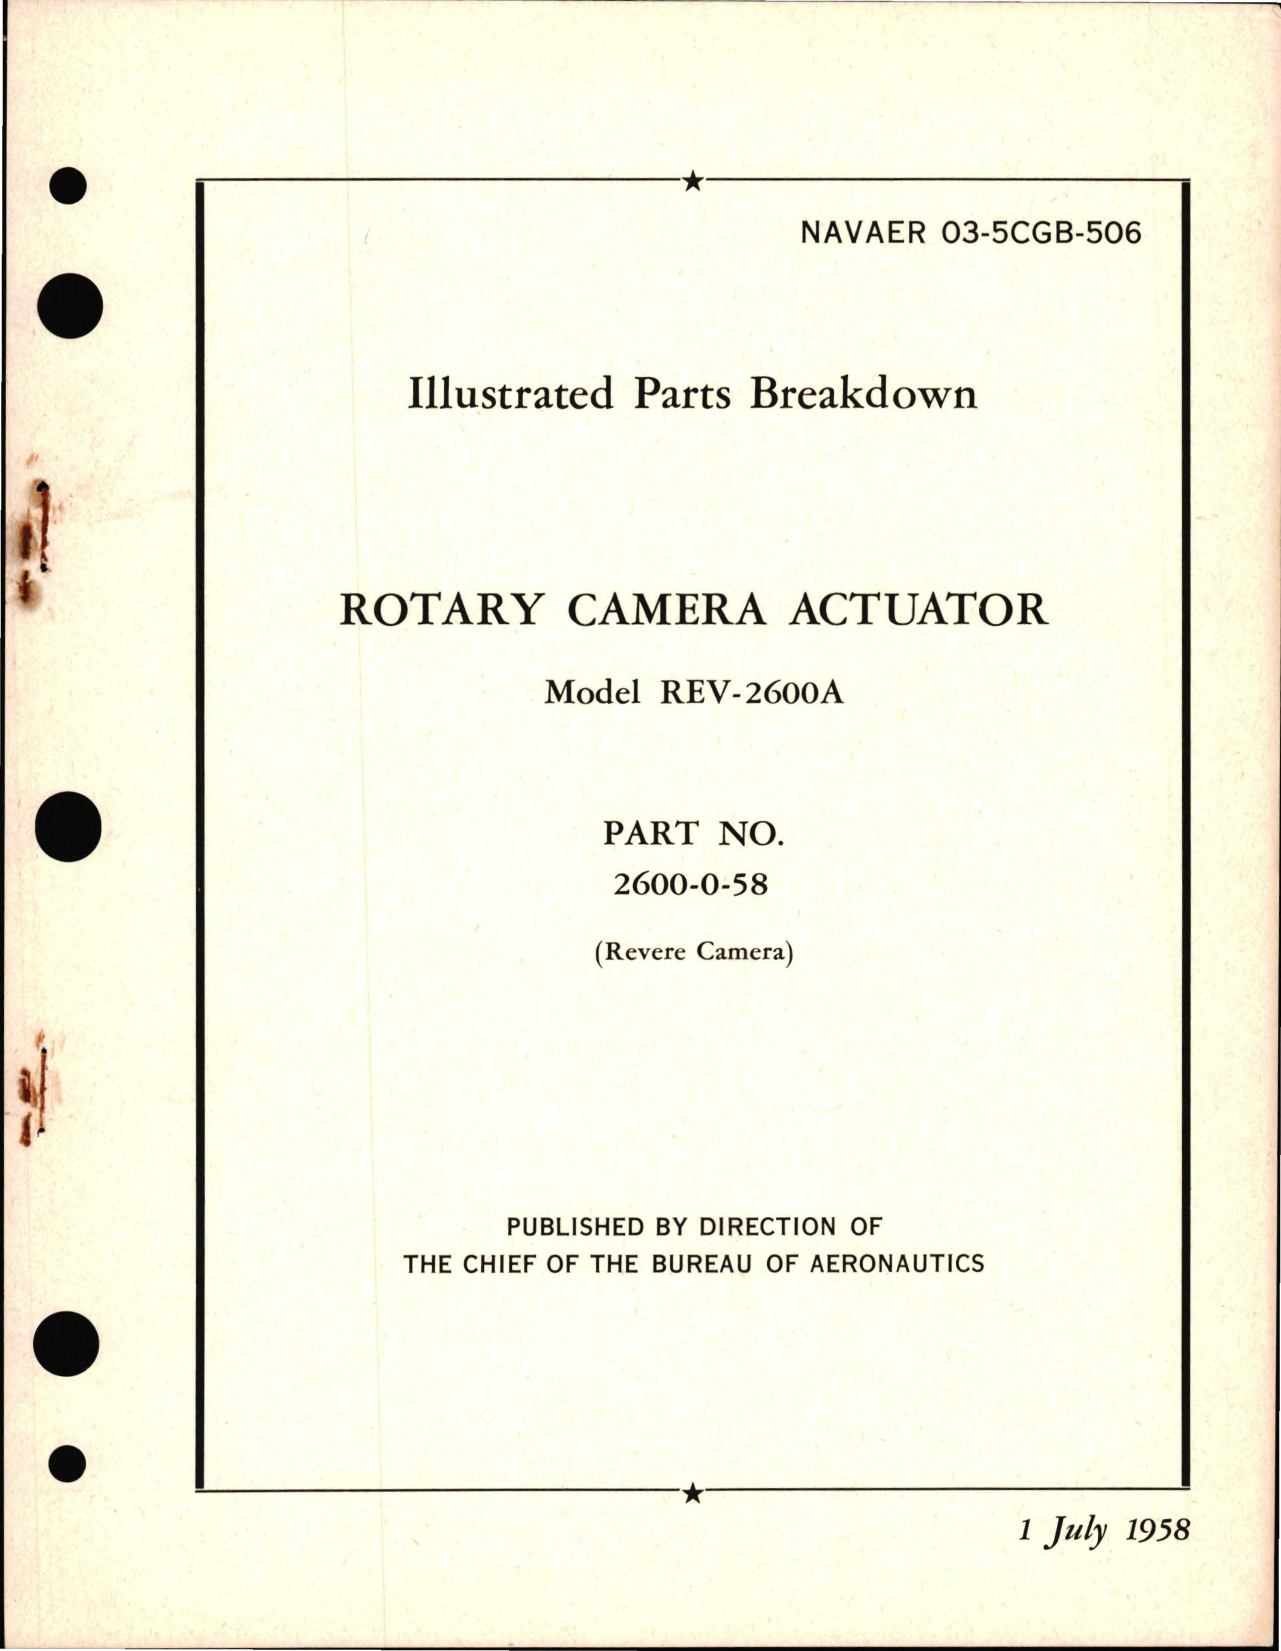 Sample page 1 from AirCorps Library document: Illustrated Parts Breakdown for Rotary Camera Actuator Model REV-2600A - Part 2600-0-58 